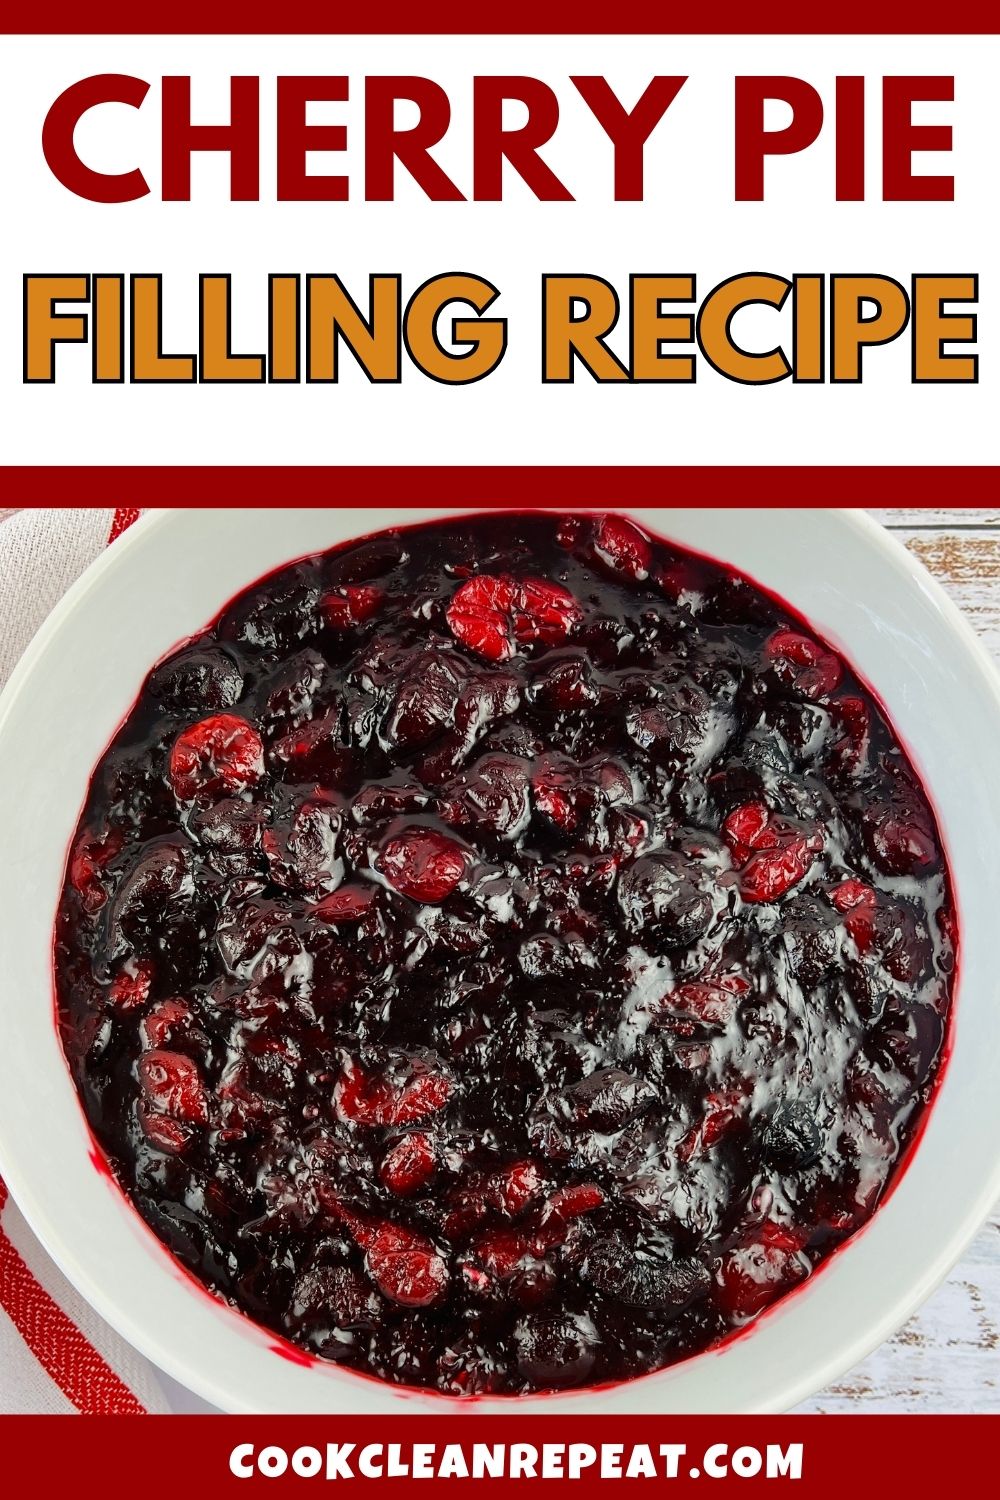 Pinterest image for a cherry pie filling recipe